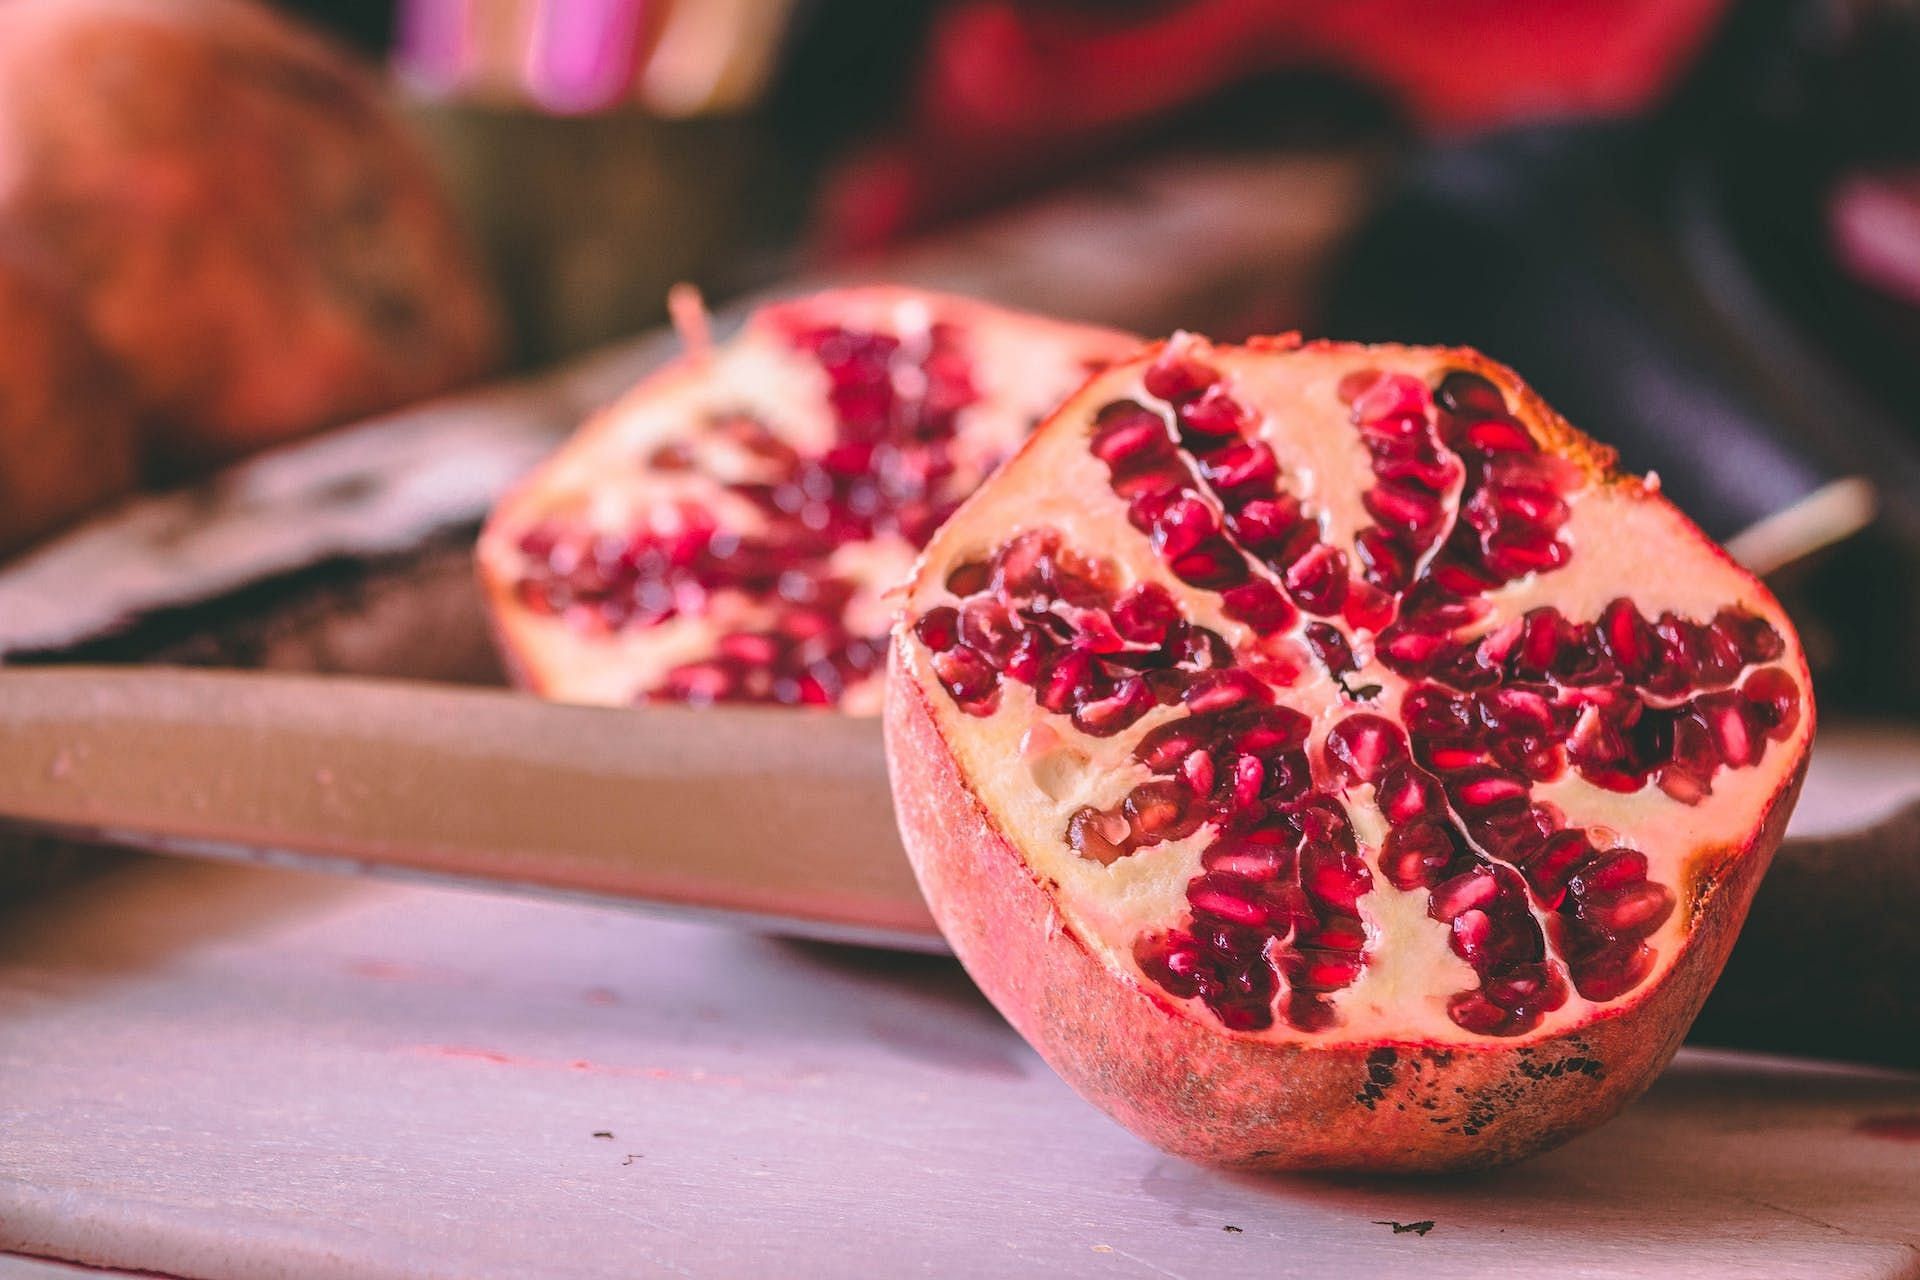 Pomegranate seeds are rich in antioxidants (Image via Pexels/hitesh choudhary)